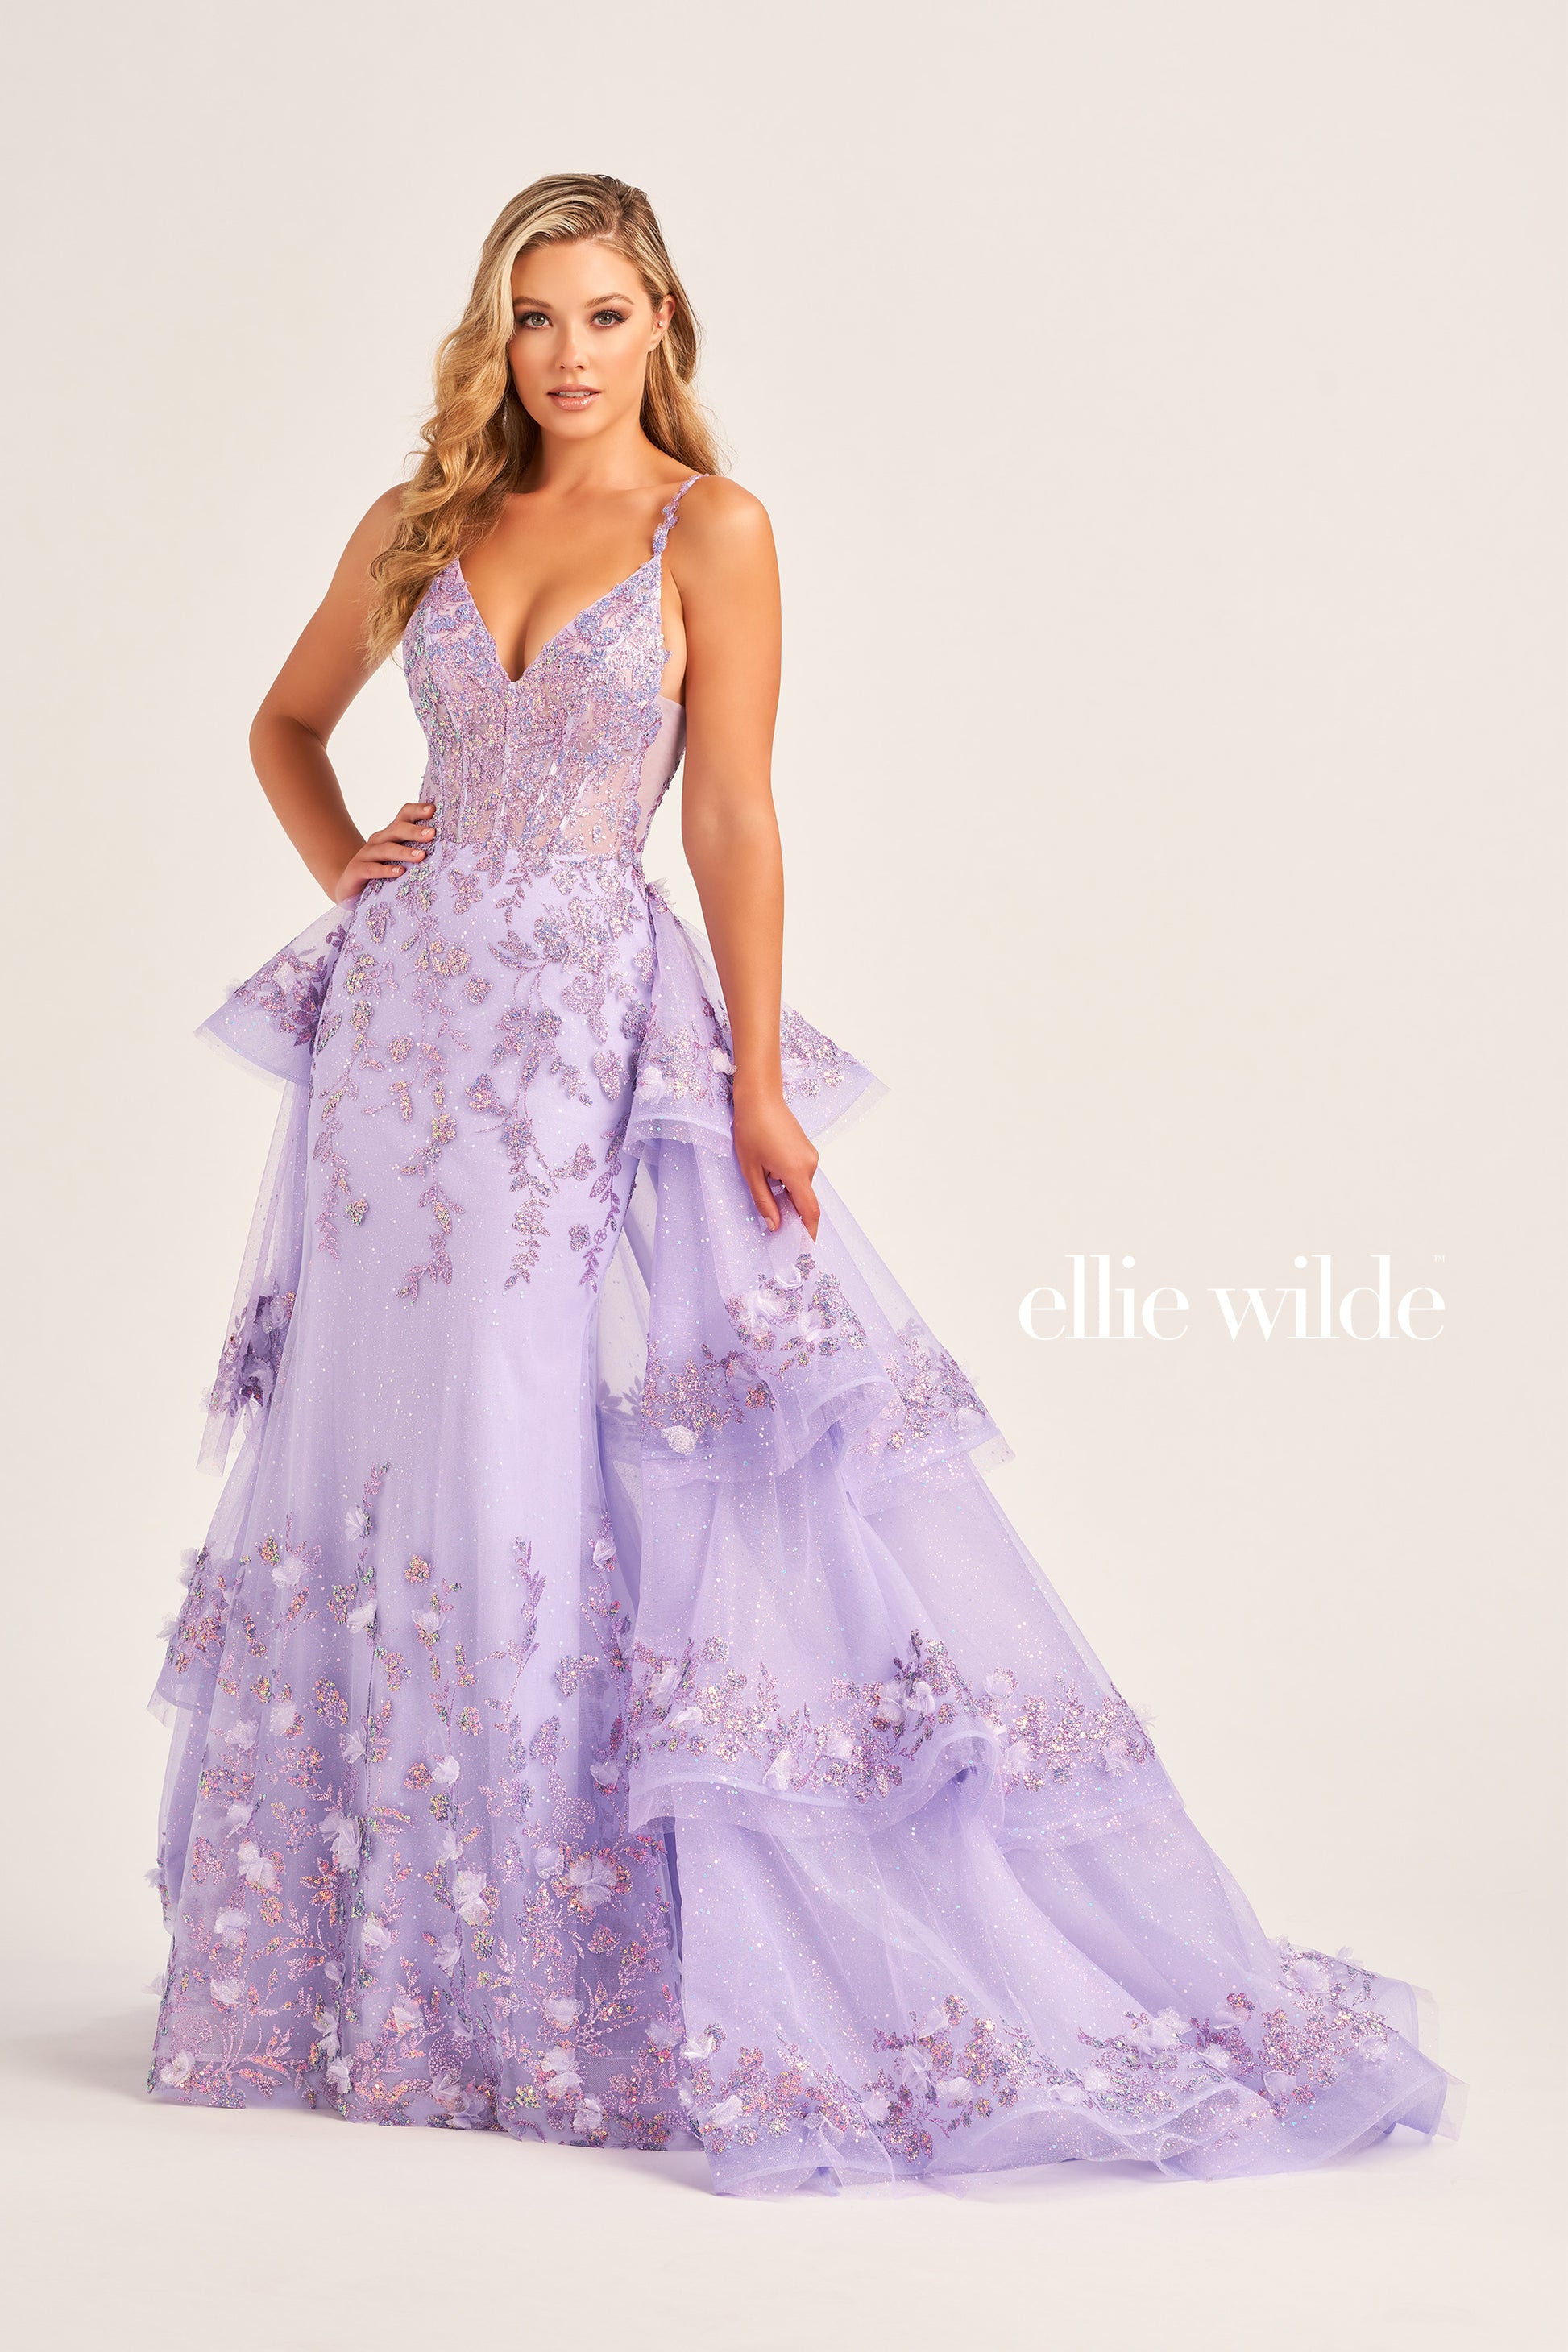 Look and feel your best in the Ellie Wilde EW35045 Prom Dress. This stunning piece features a sheer corset bodice with sequin and 3D Floral Lace accents, a detachable layered  train, three-dimensional flowers, and a glitter tulle skirt. The dress is constructed with cracked ice, sequin, and delicate lace-up back for a truly memorable look.  COLOR: LIGHT BLUE, MAGENTA, LILAC, IRIS SIZE: 00 - 16